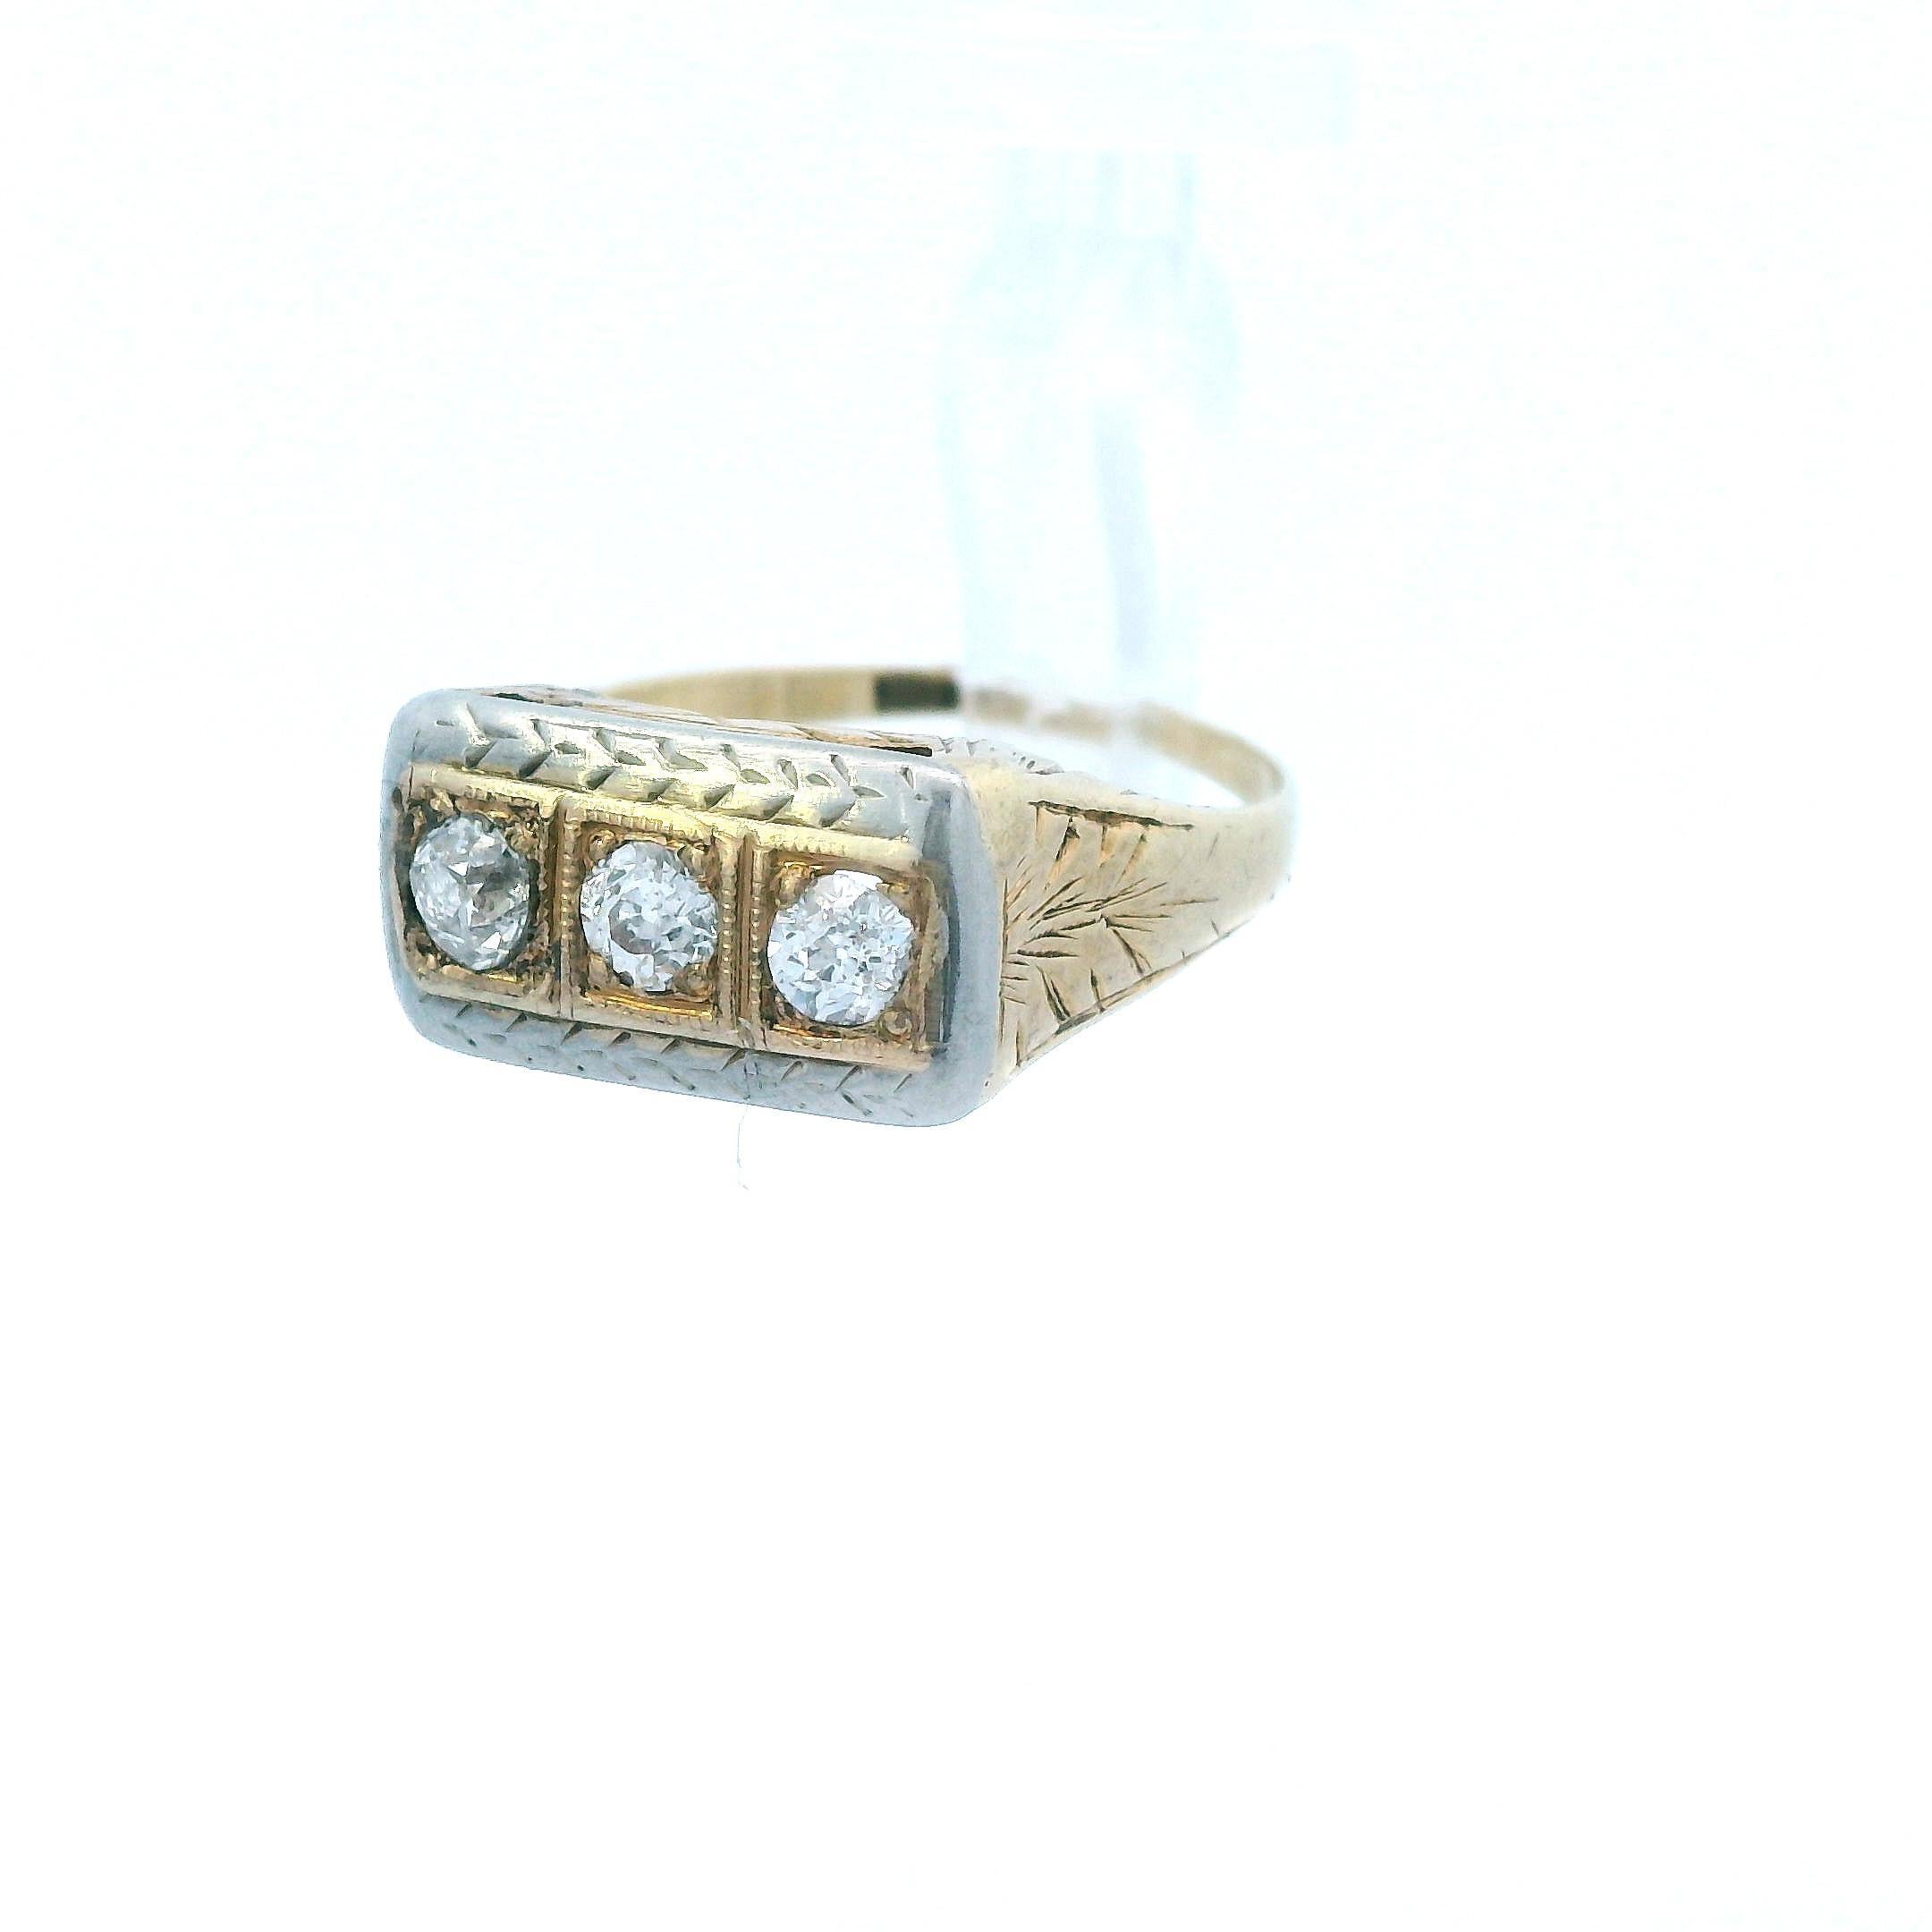 1925 Art Deco 14k Yellow and White Gold Two Tone Diamond 3 Stone Ring For Sale 2